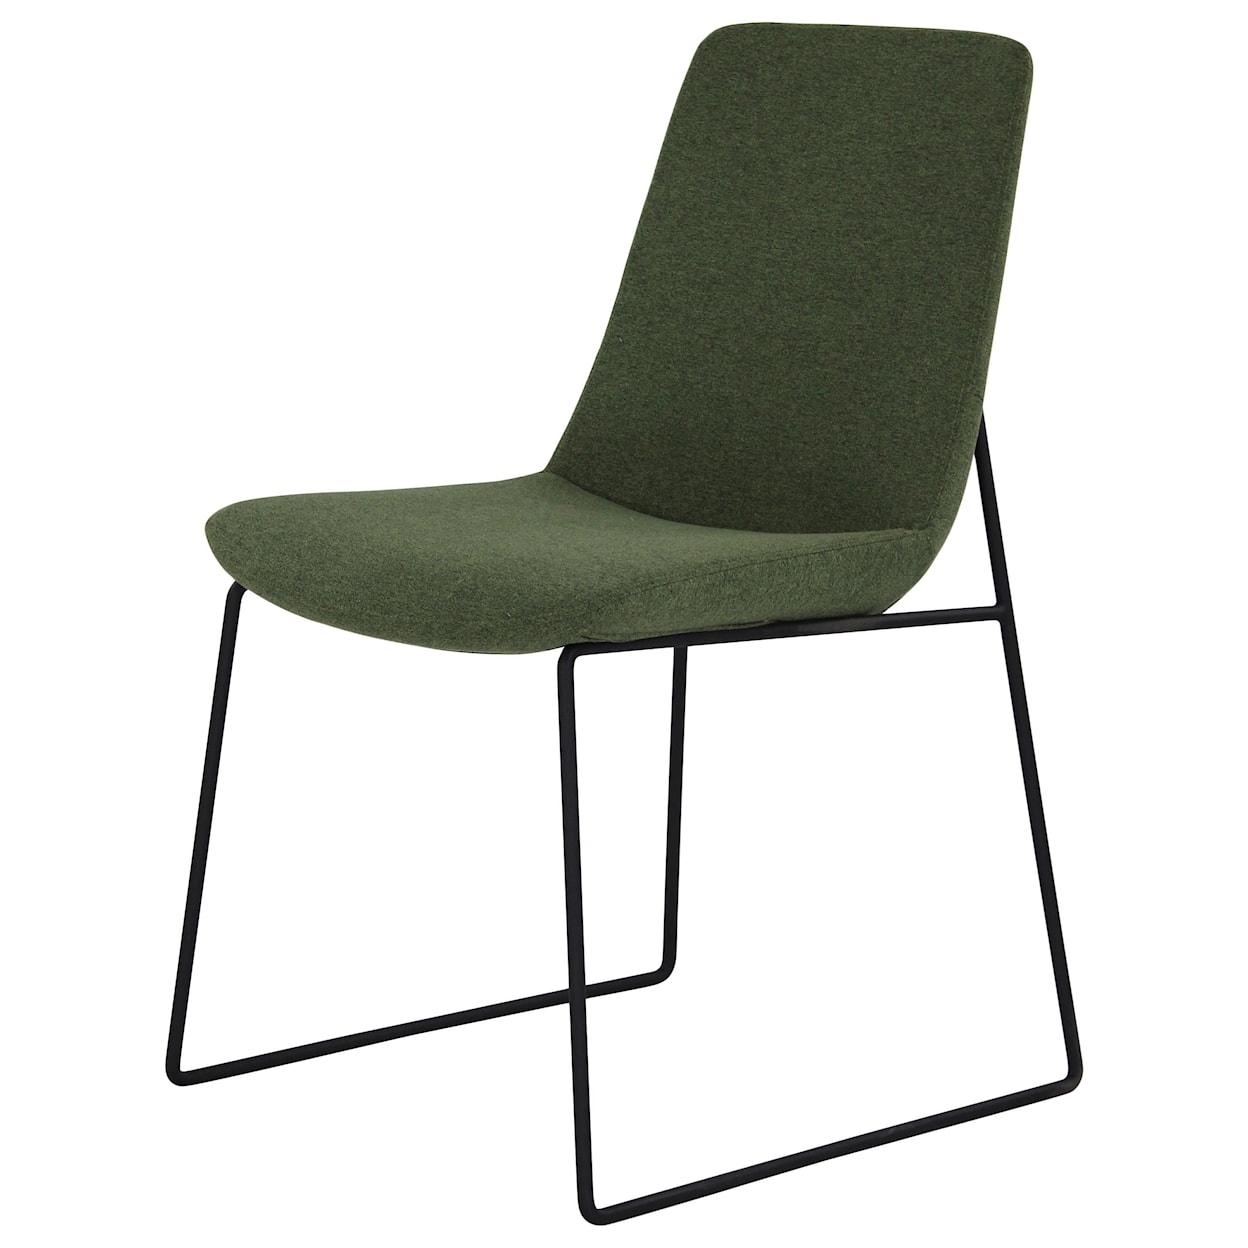 Moe's Home Collection Ruth Dining Chair